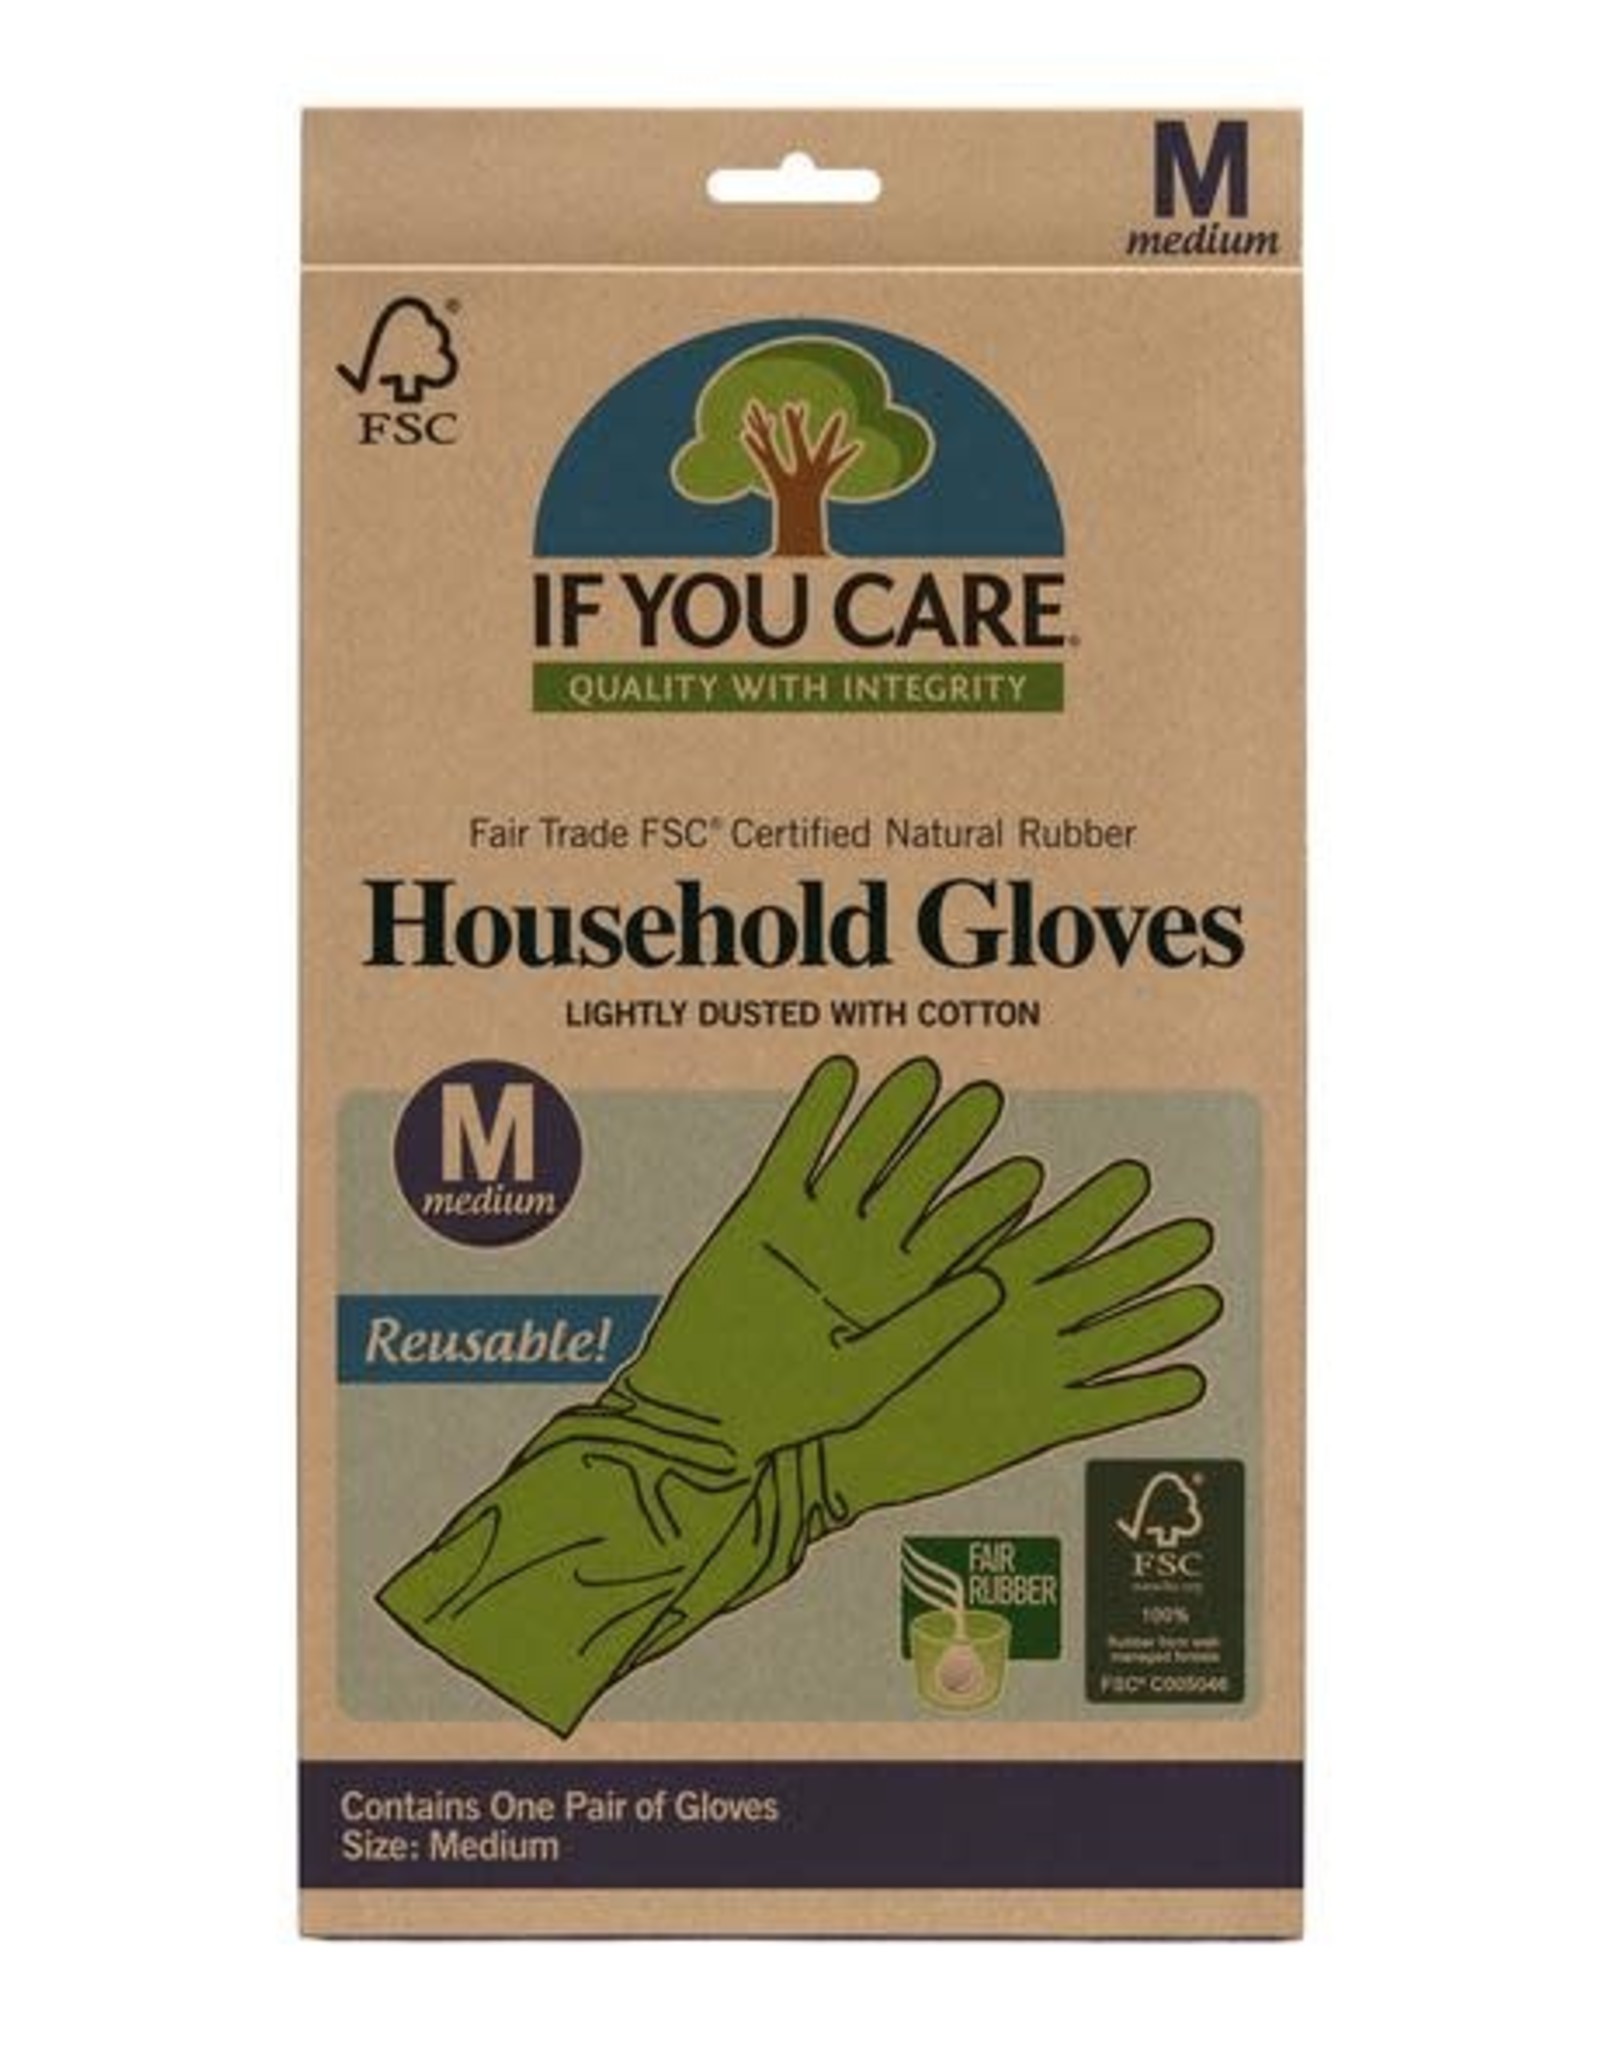 If You Care Household Gloves